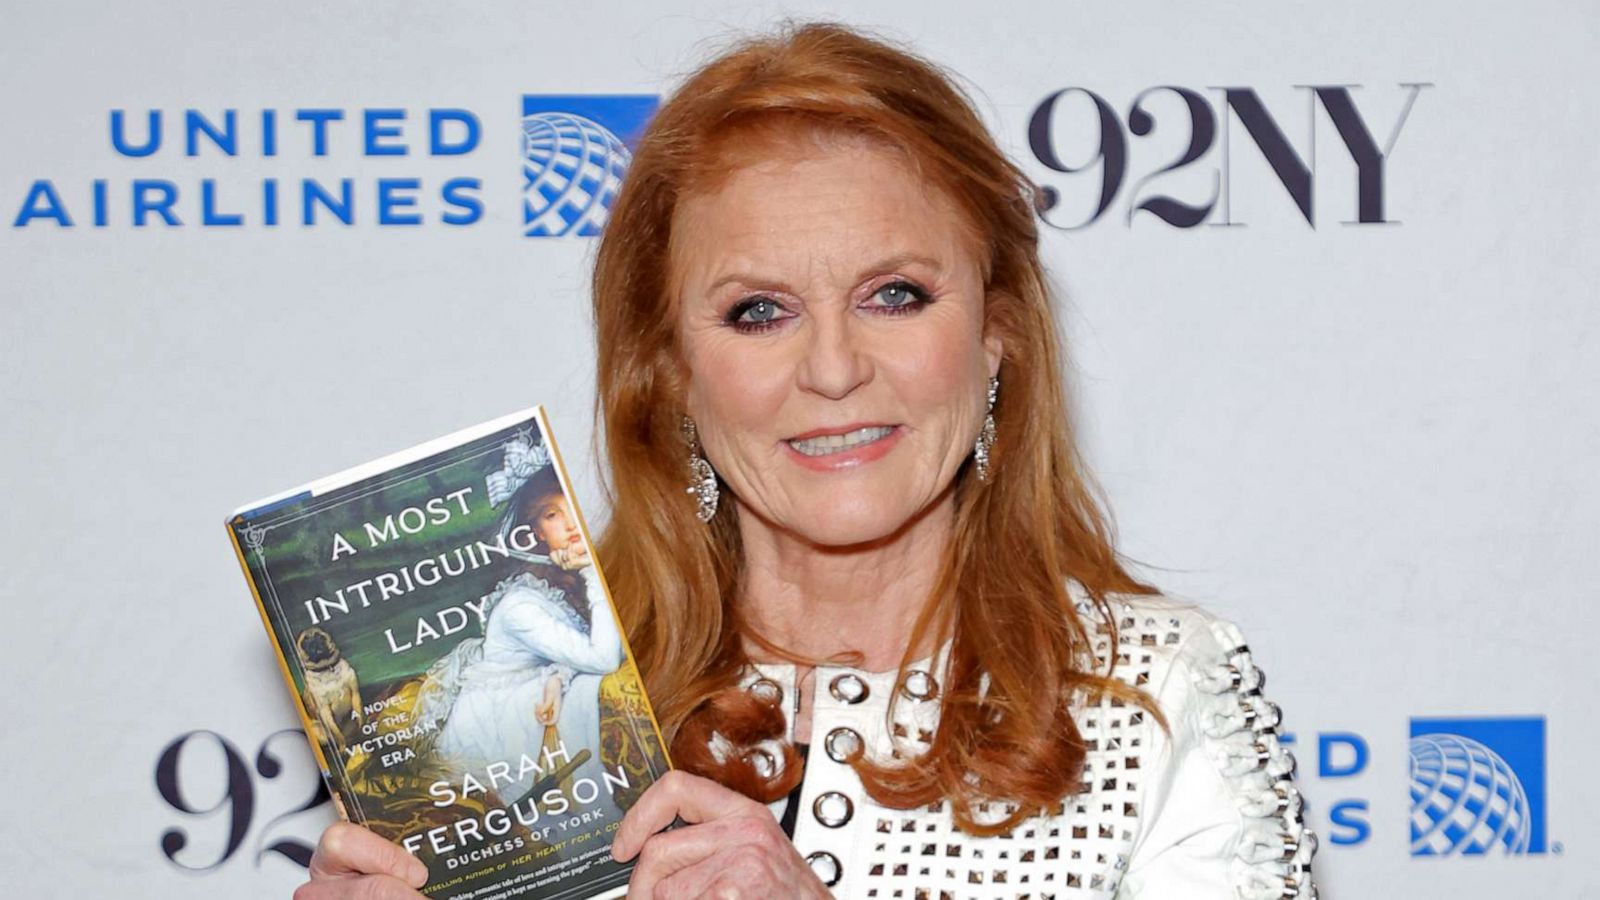 Sarah Ferguson says she feels liberated after death of Queen Elizabeth